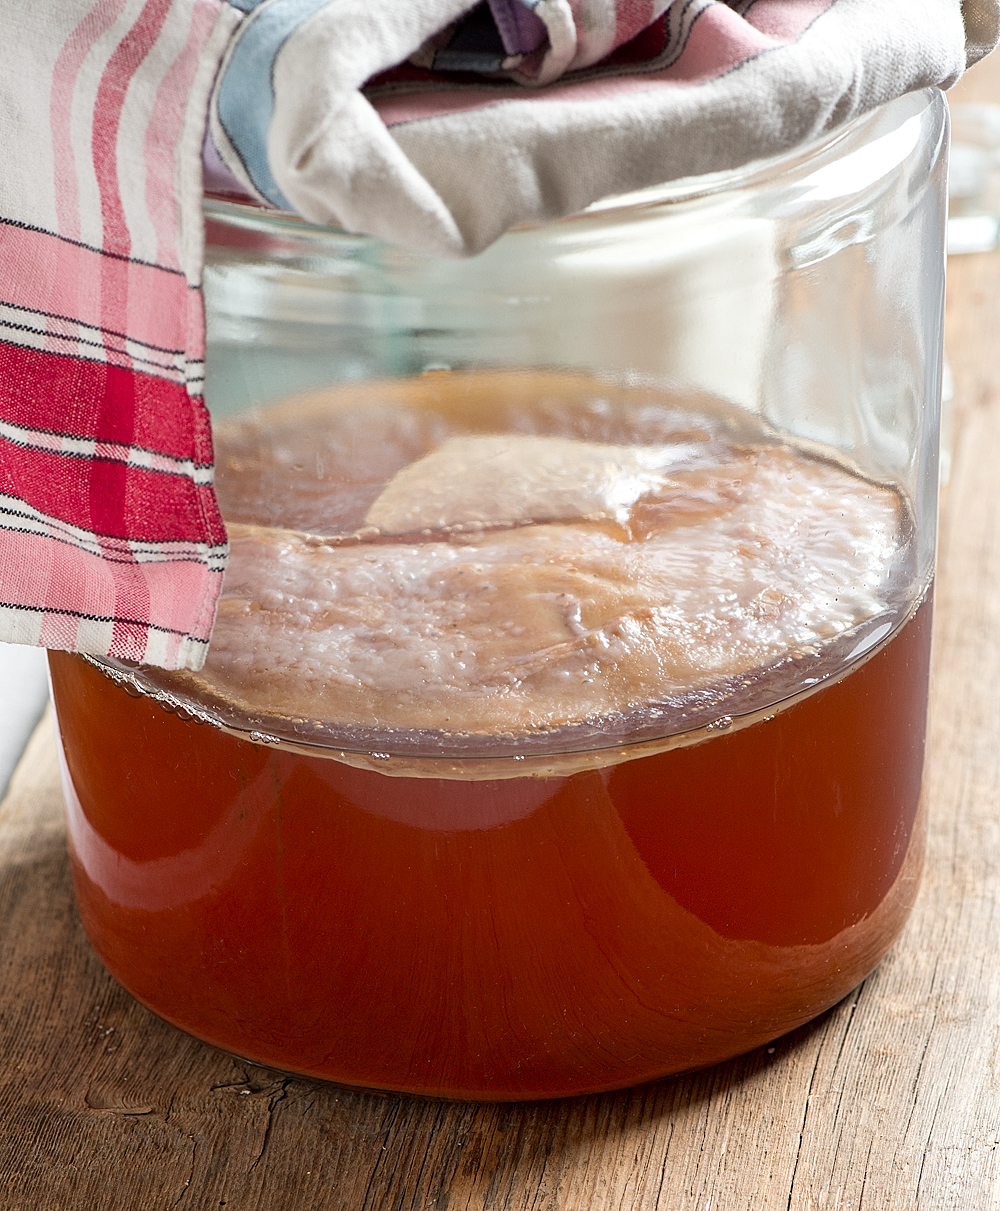 Skip the store bought and brew your own kombucha right at home with these Easy Kombucha instructions for perfect tea every time. The step by step instructions with photos make it easy! 